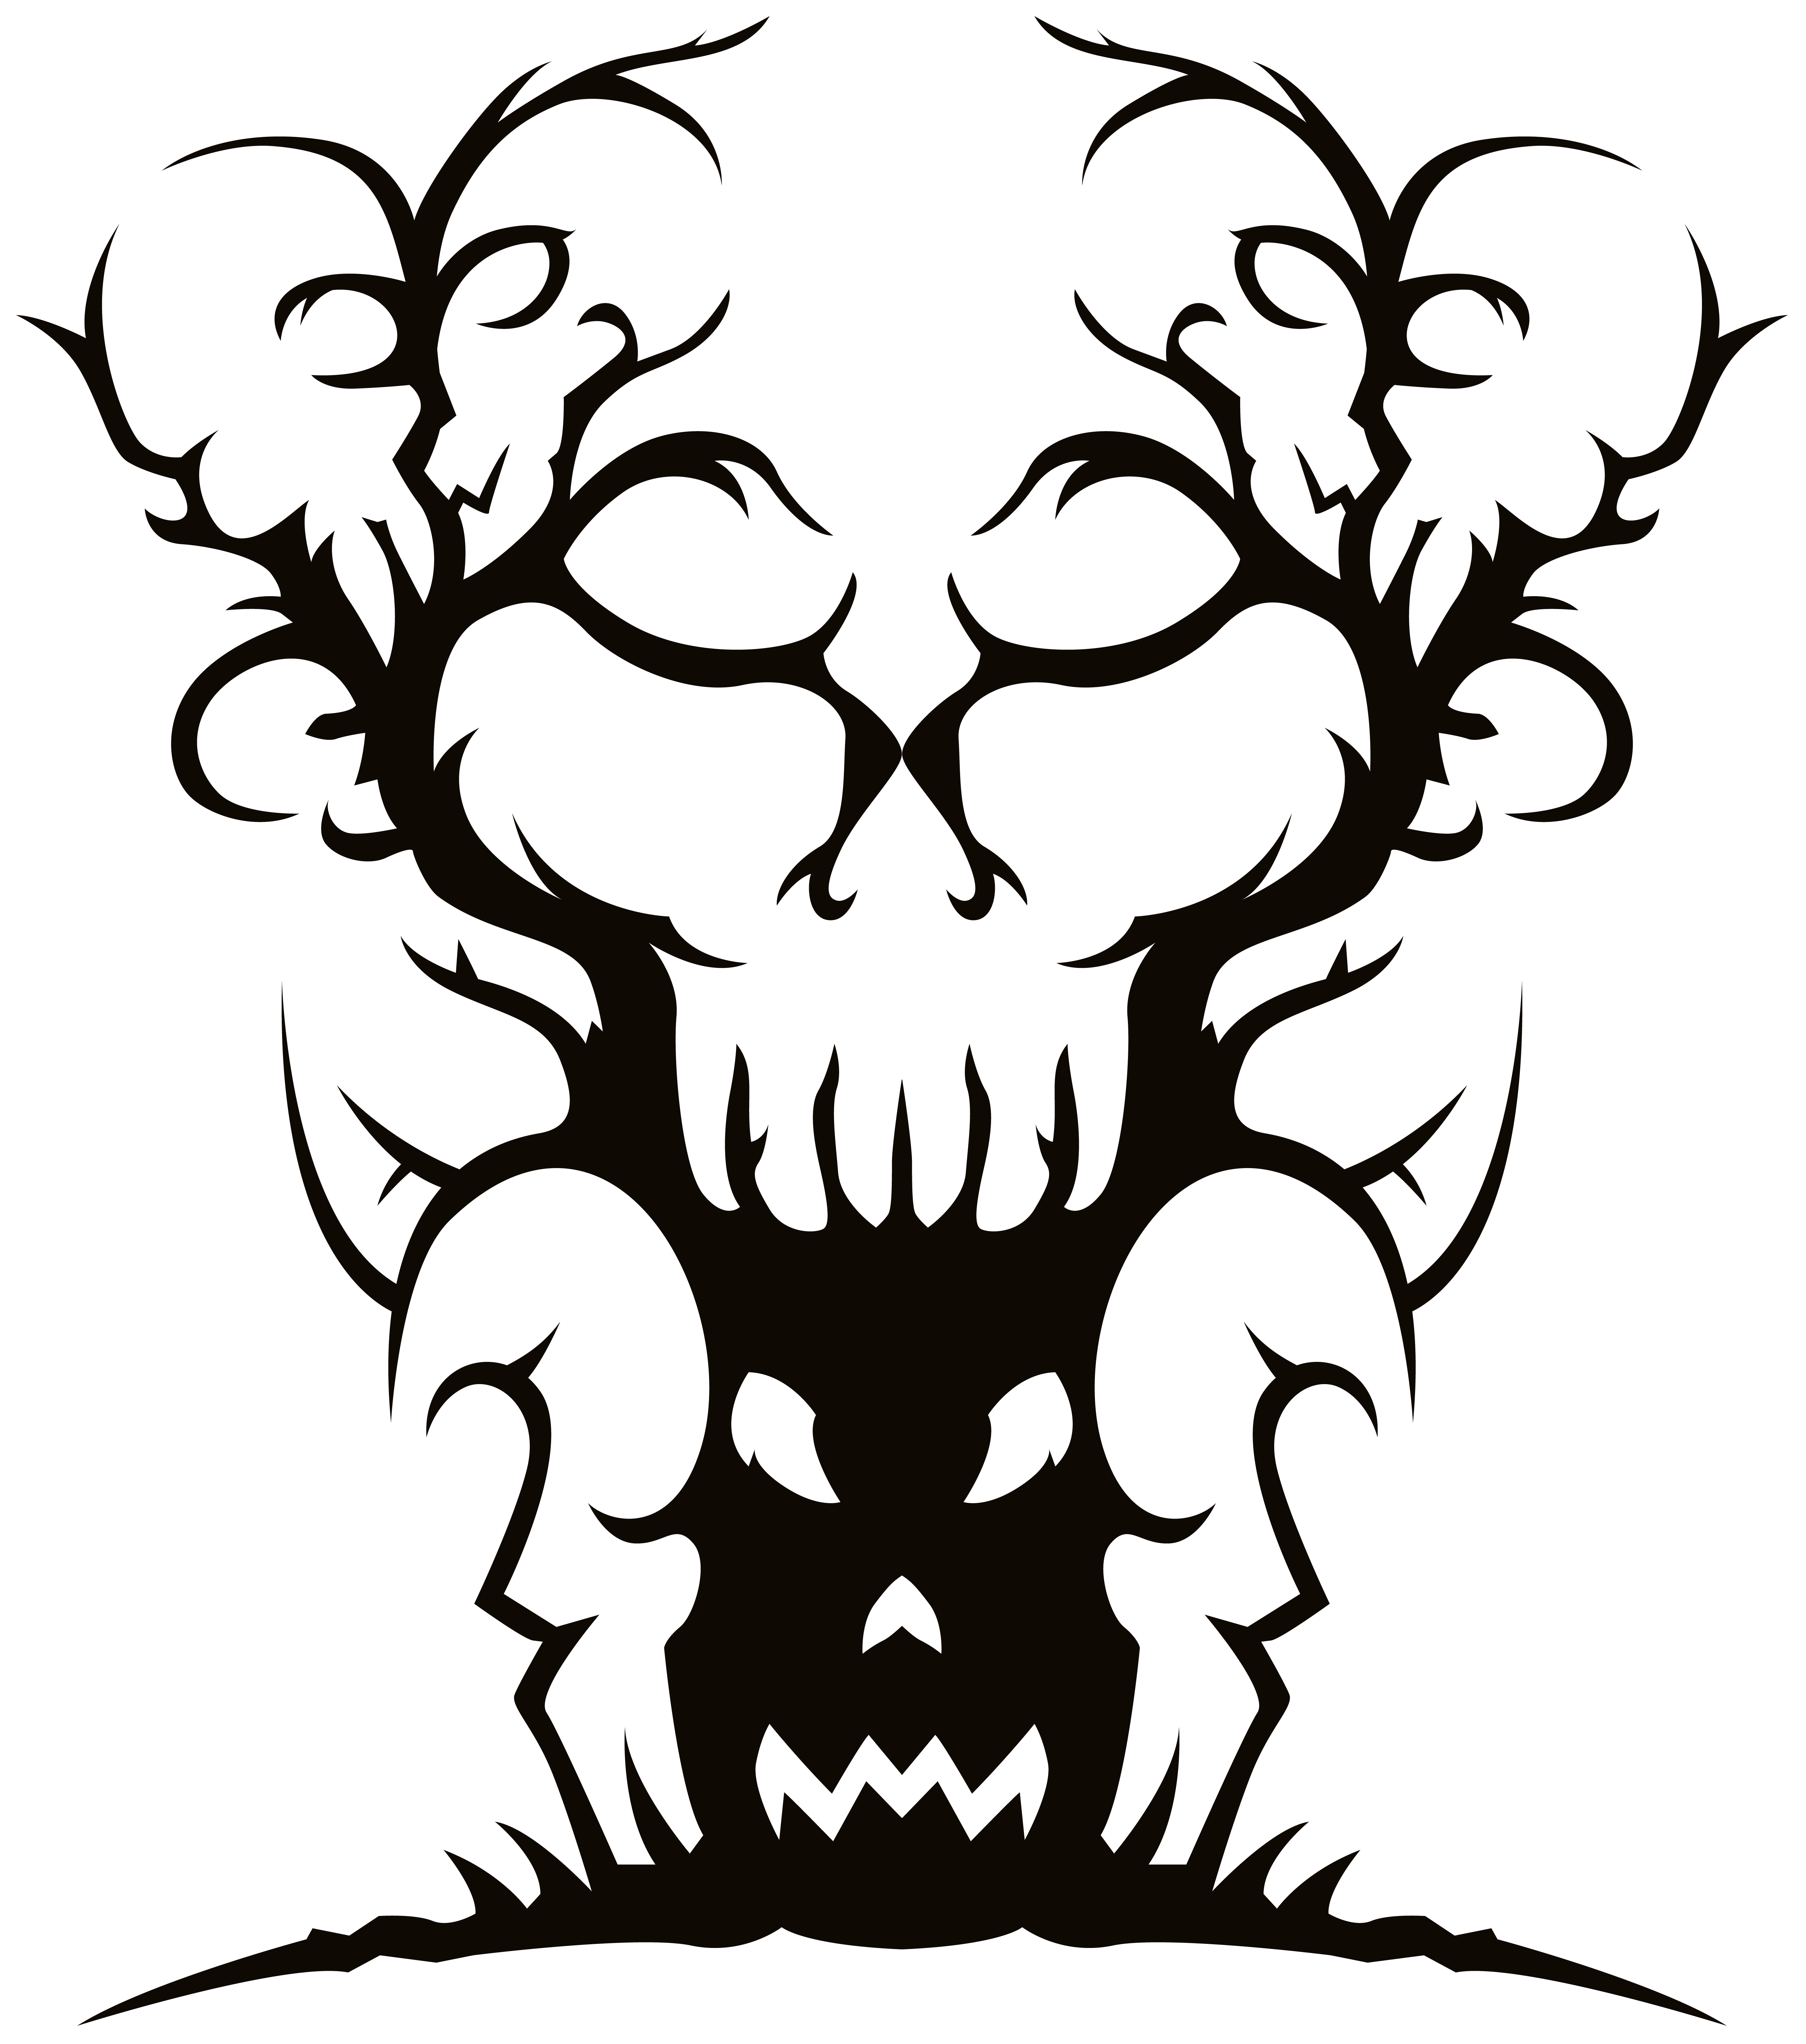 Scary spooky tree png. Witch clipart creepy